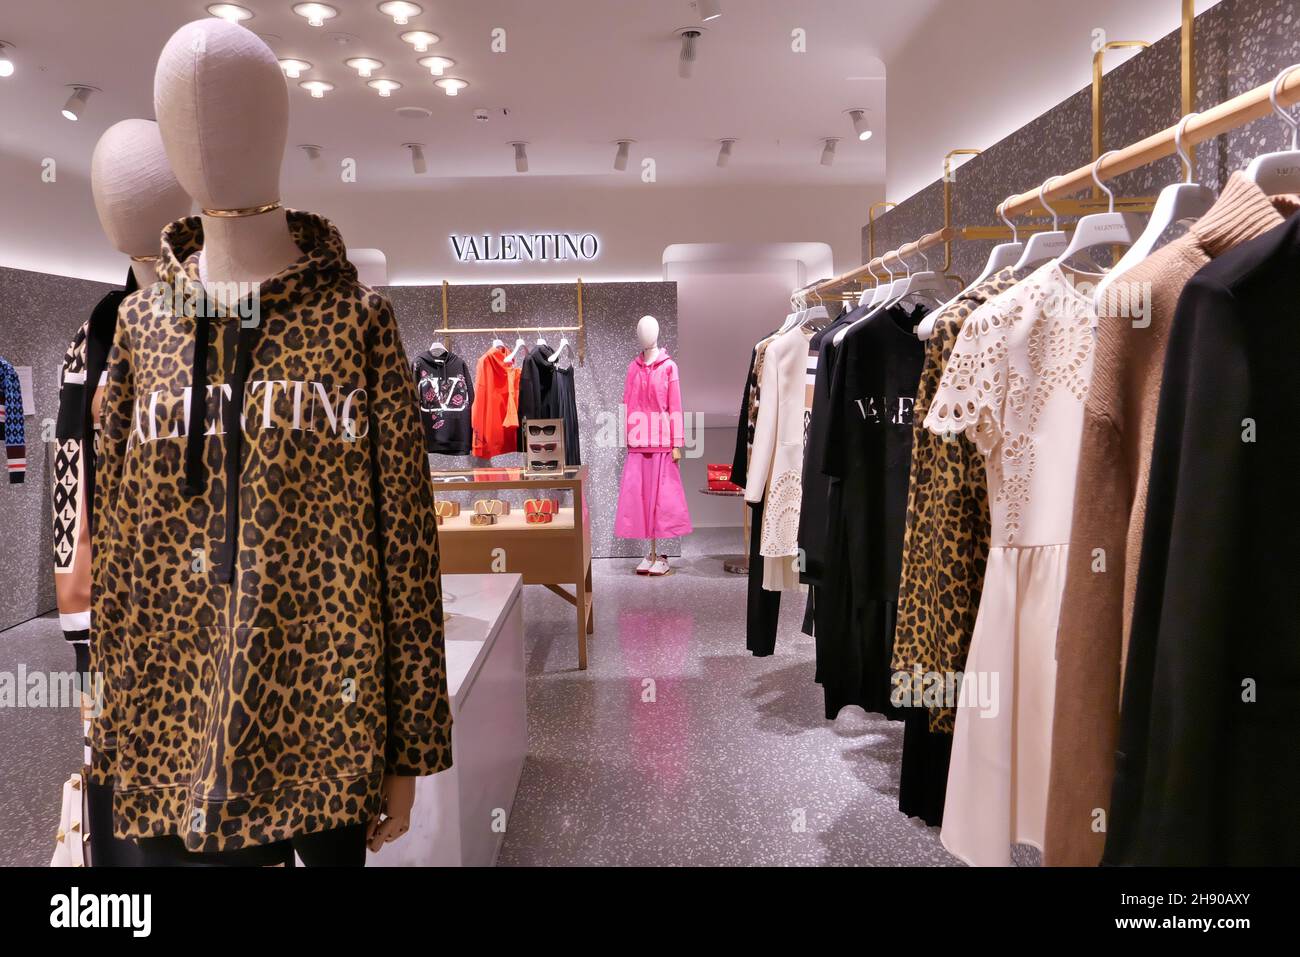 VALENTINO CLOTHING ON DISPLAY INSIDE THE FASHION STORE Stock Photo - Alamy